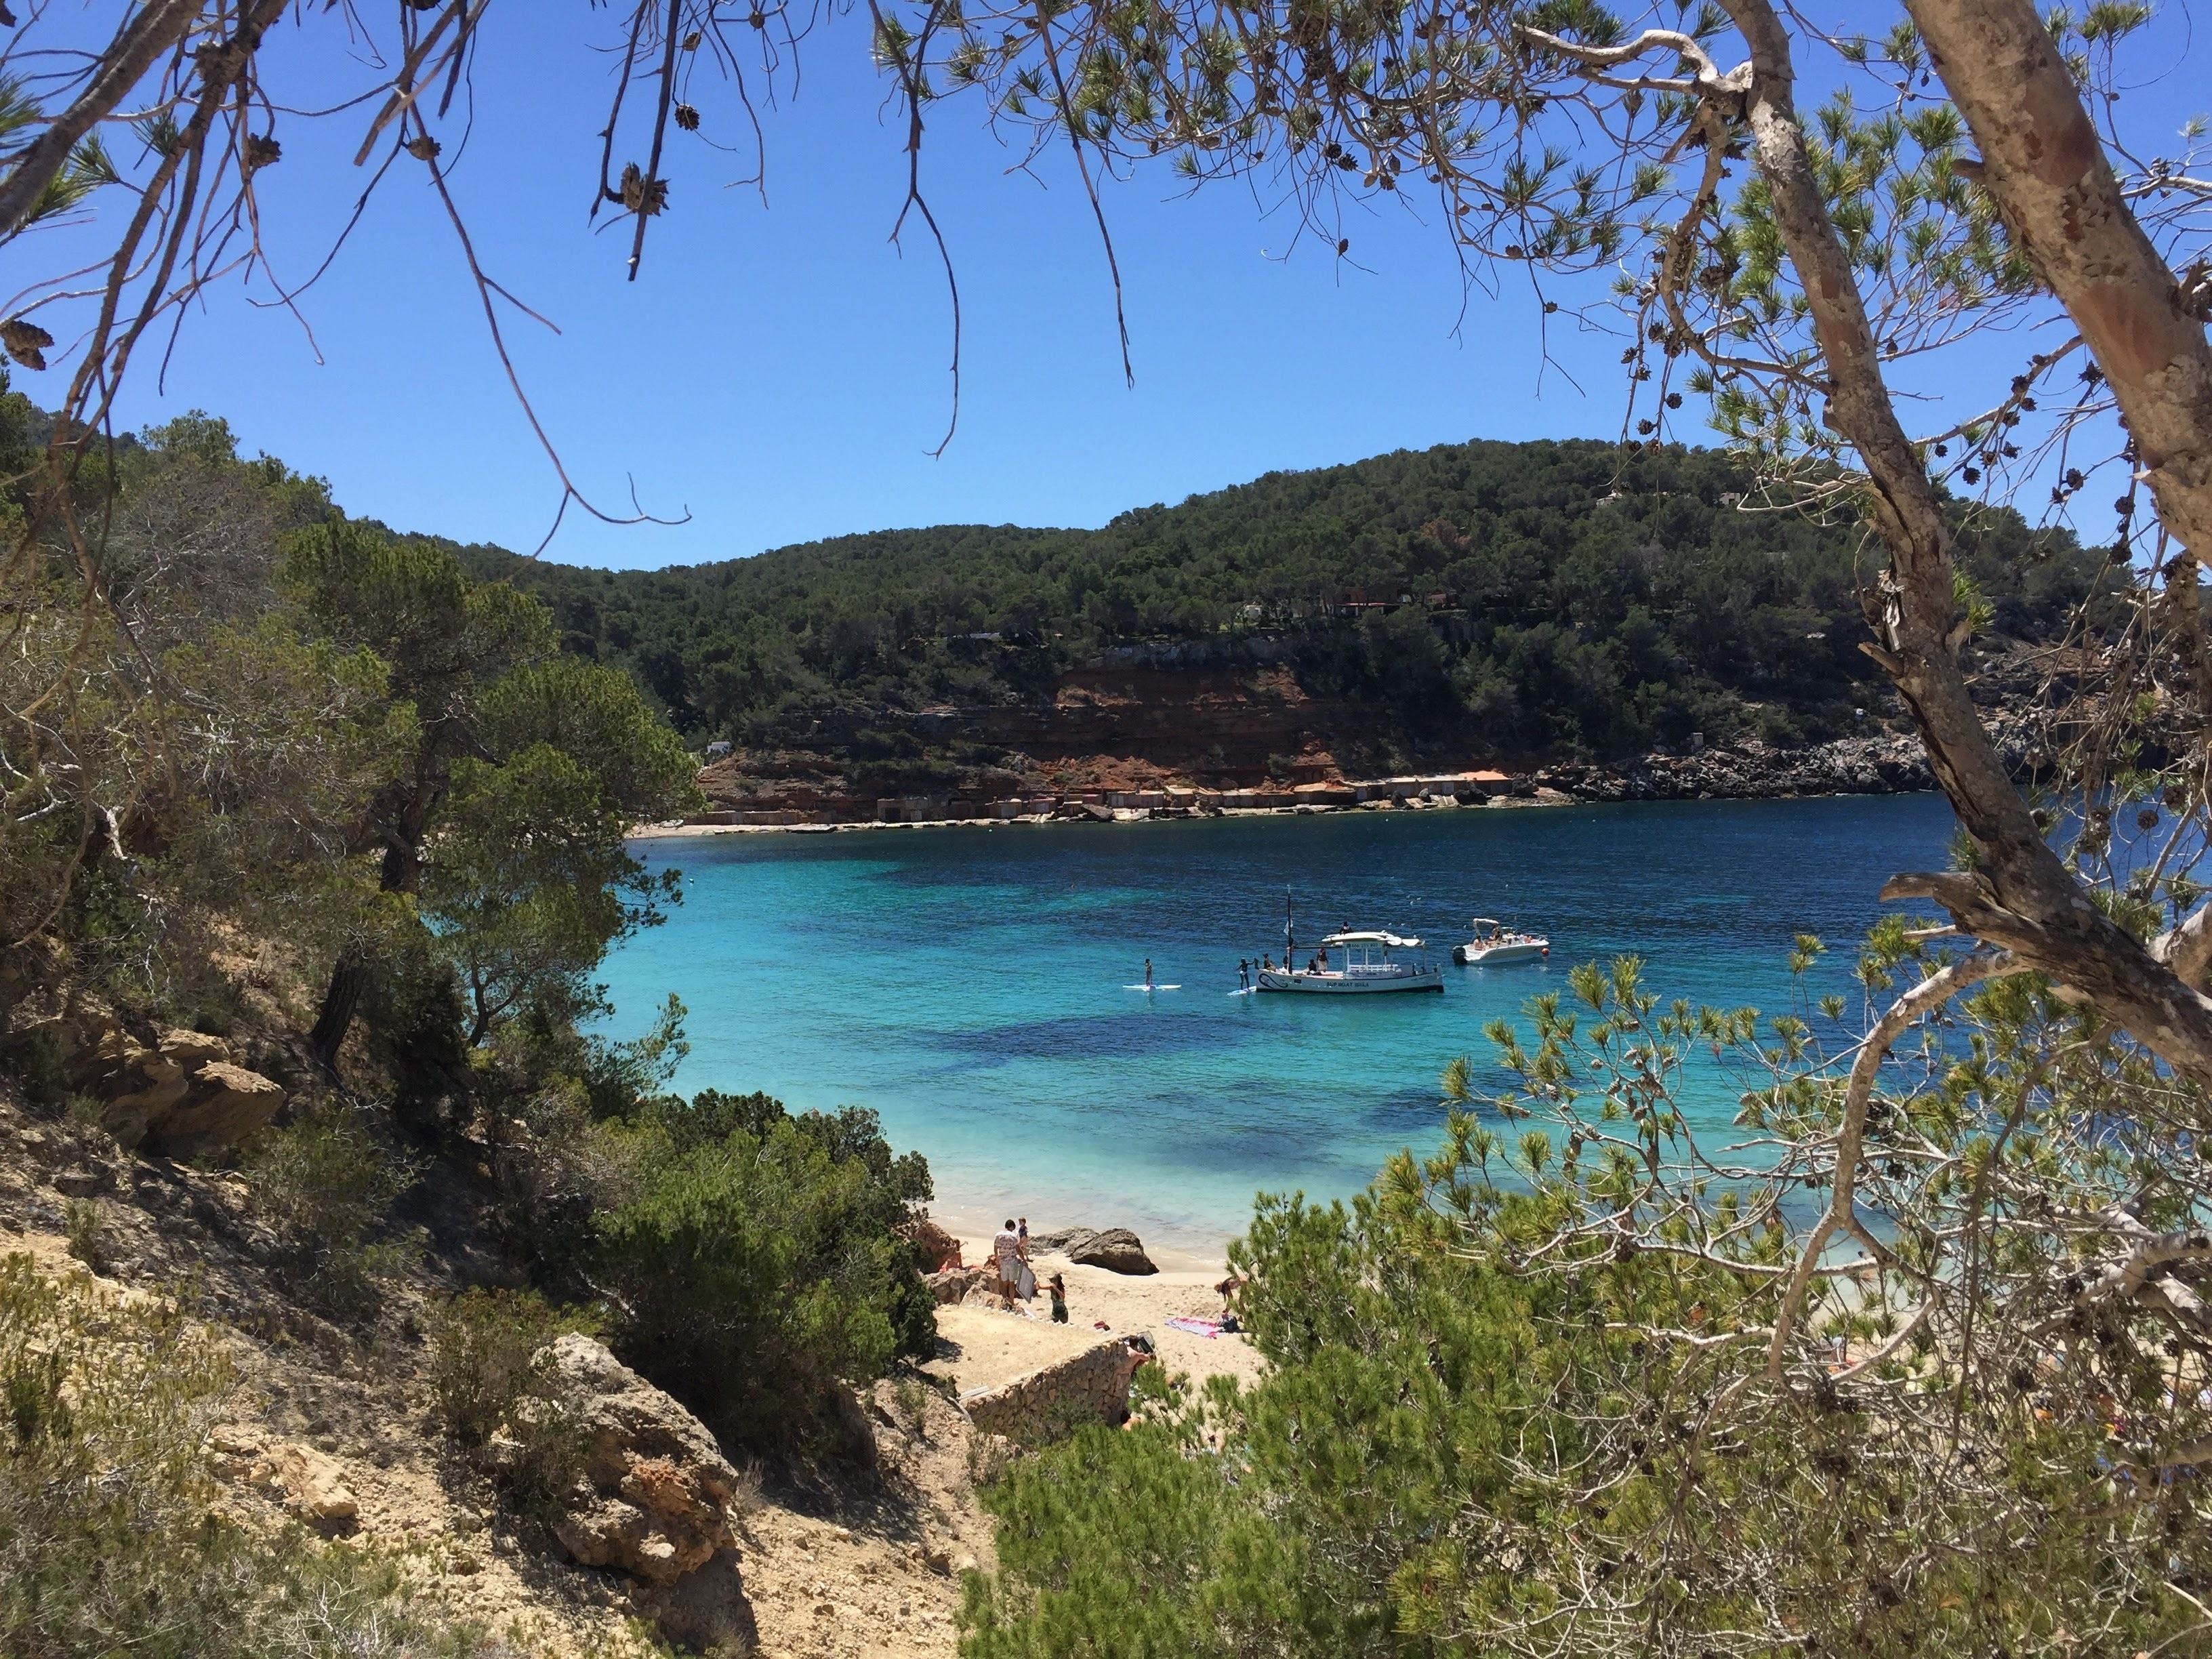 One of my favourite spots in #Ibiza. Get away from all the noises and go enjoy the blue sea of Cala Saladeta. #Ibiza #Spain #LifeatExpedia